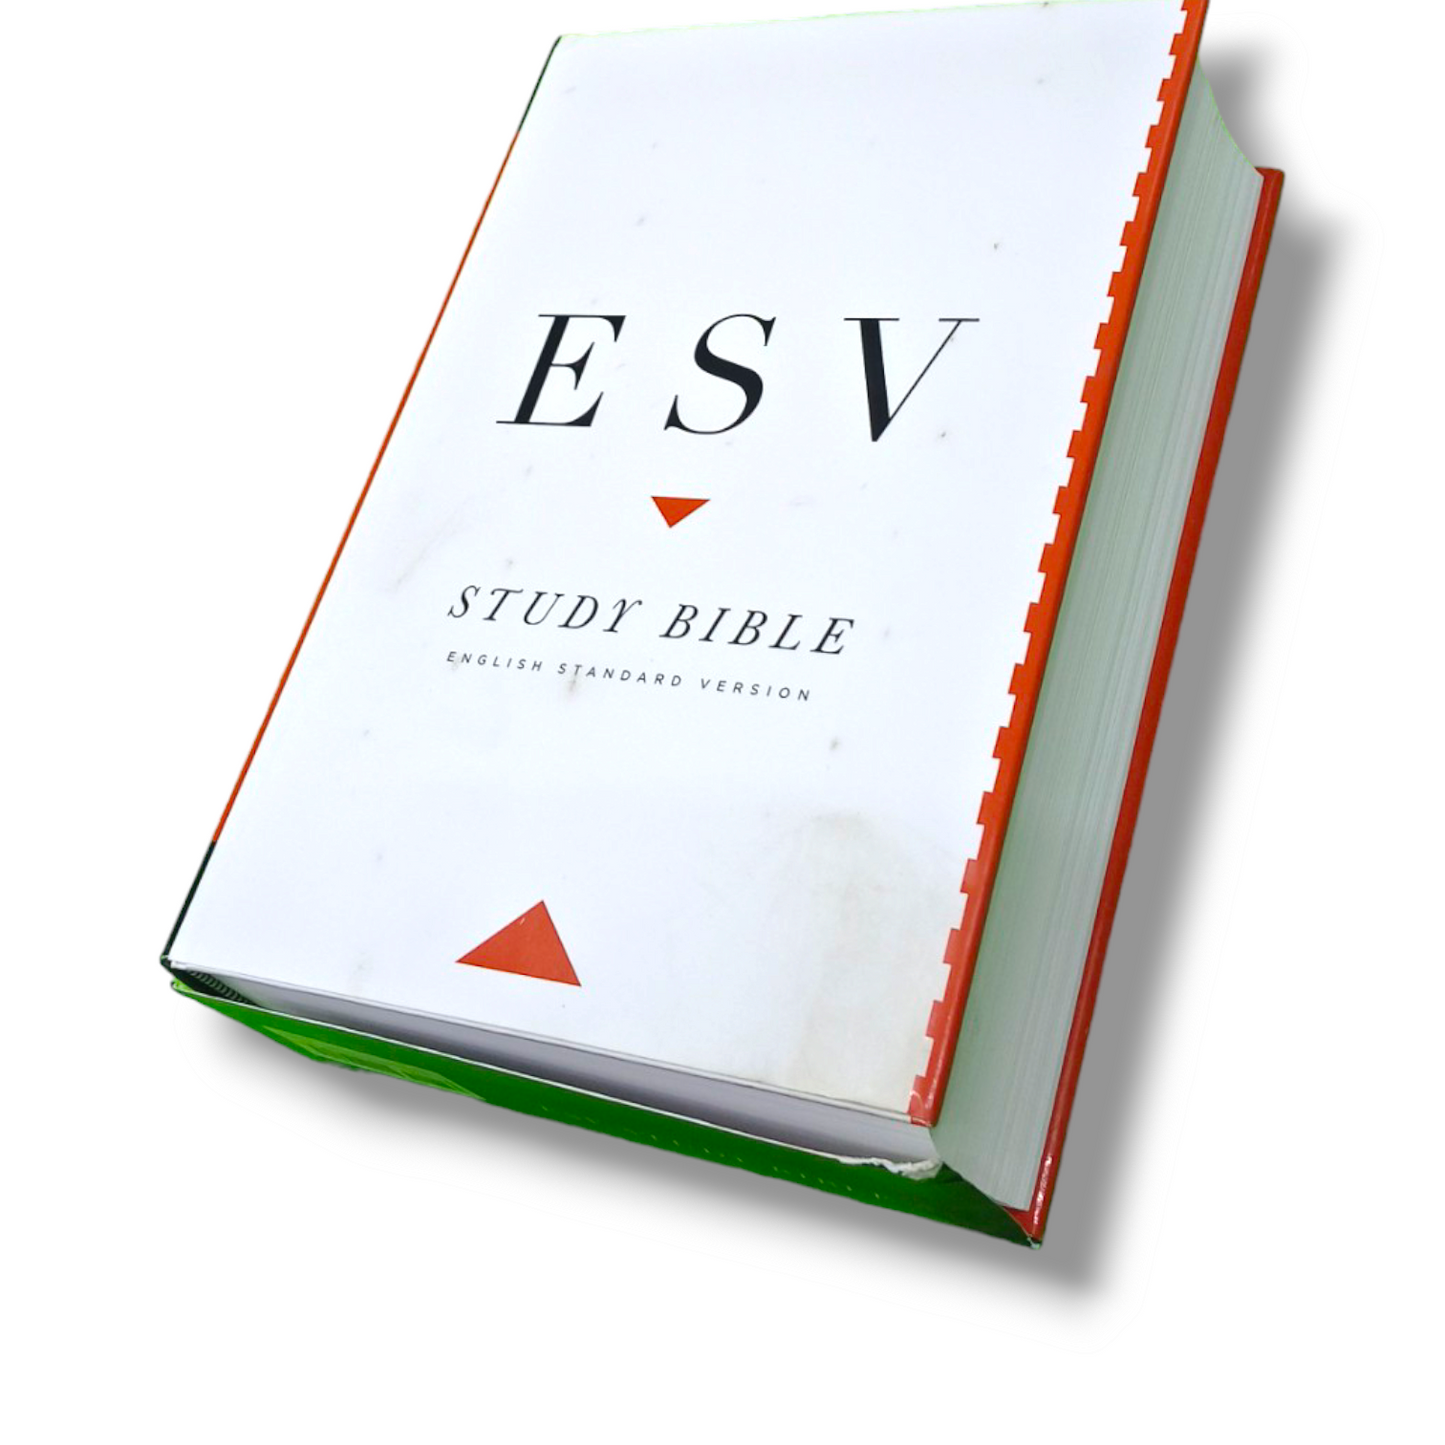 ESV Study Bible | With Related Picture's | Hard Bound Edition | Large Print | New Edition